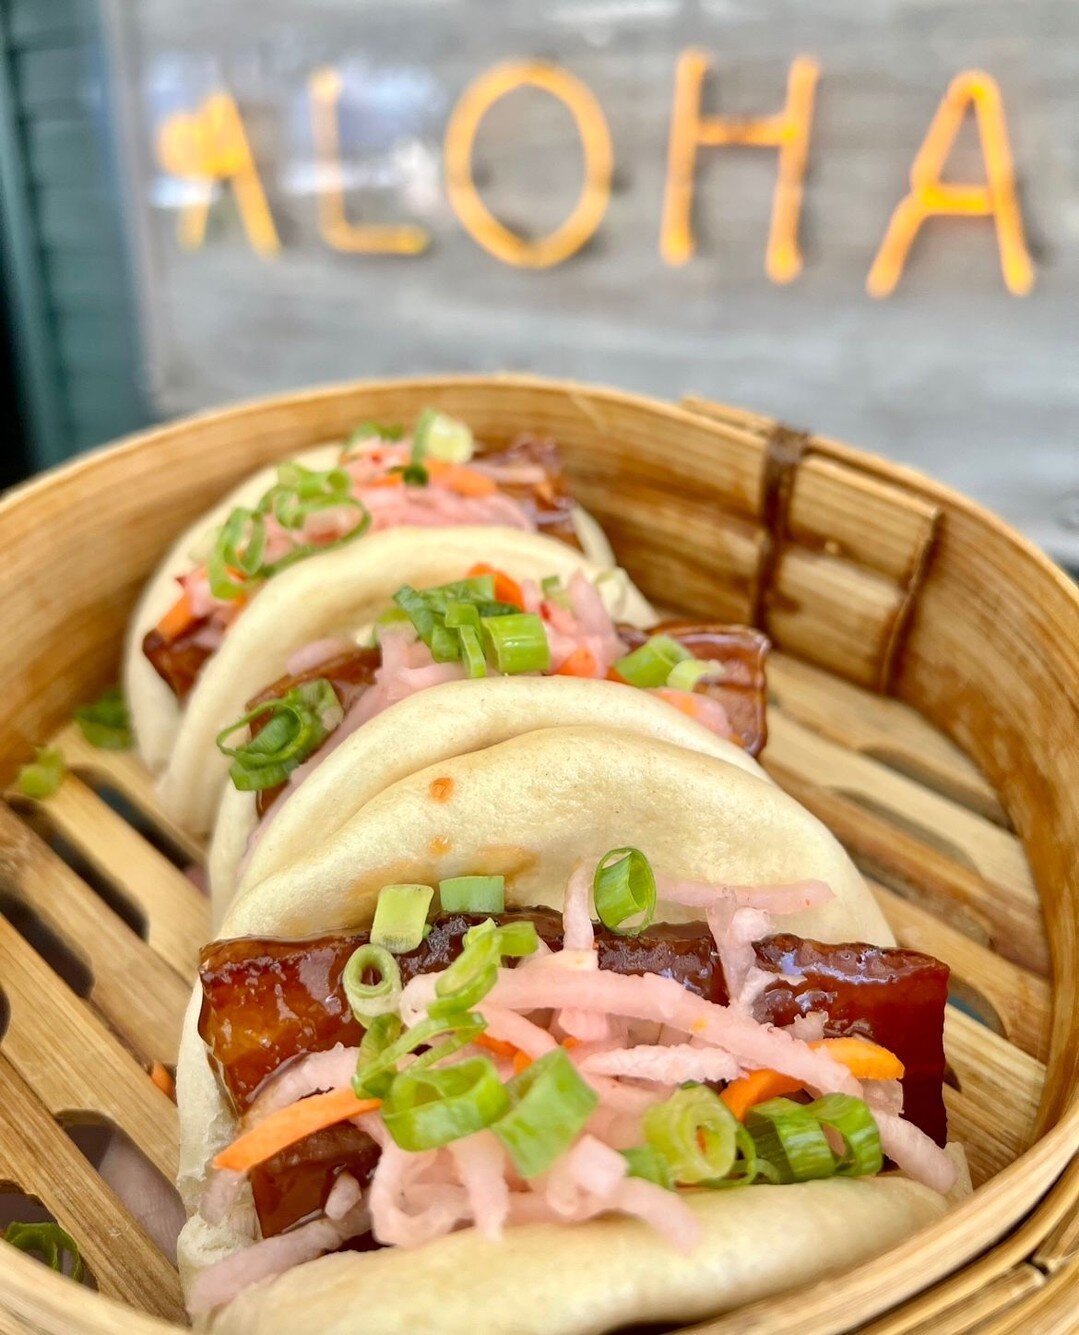 This is your daily reminder that Pork Buns are always (ALWAYS!) a good idea! 😋

#starnoodle #maui #hawaiifoodfinds #bao #mauieatlocal